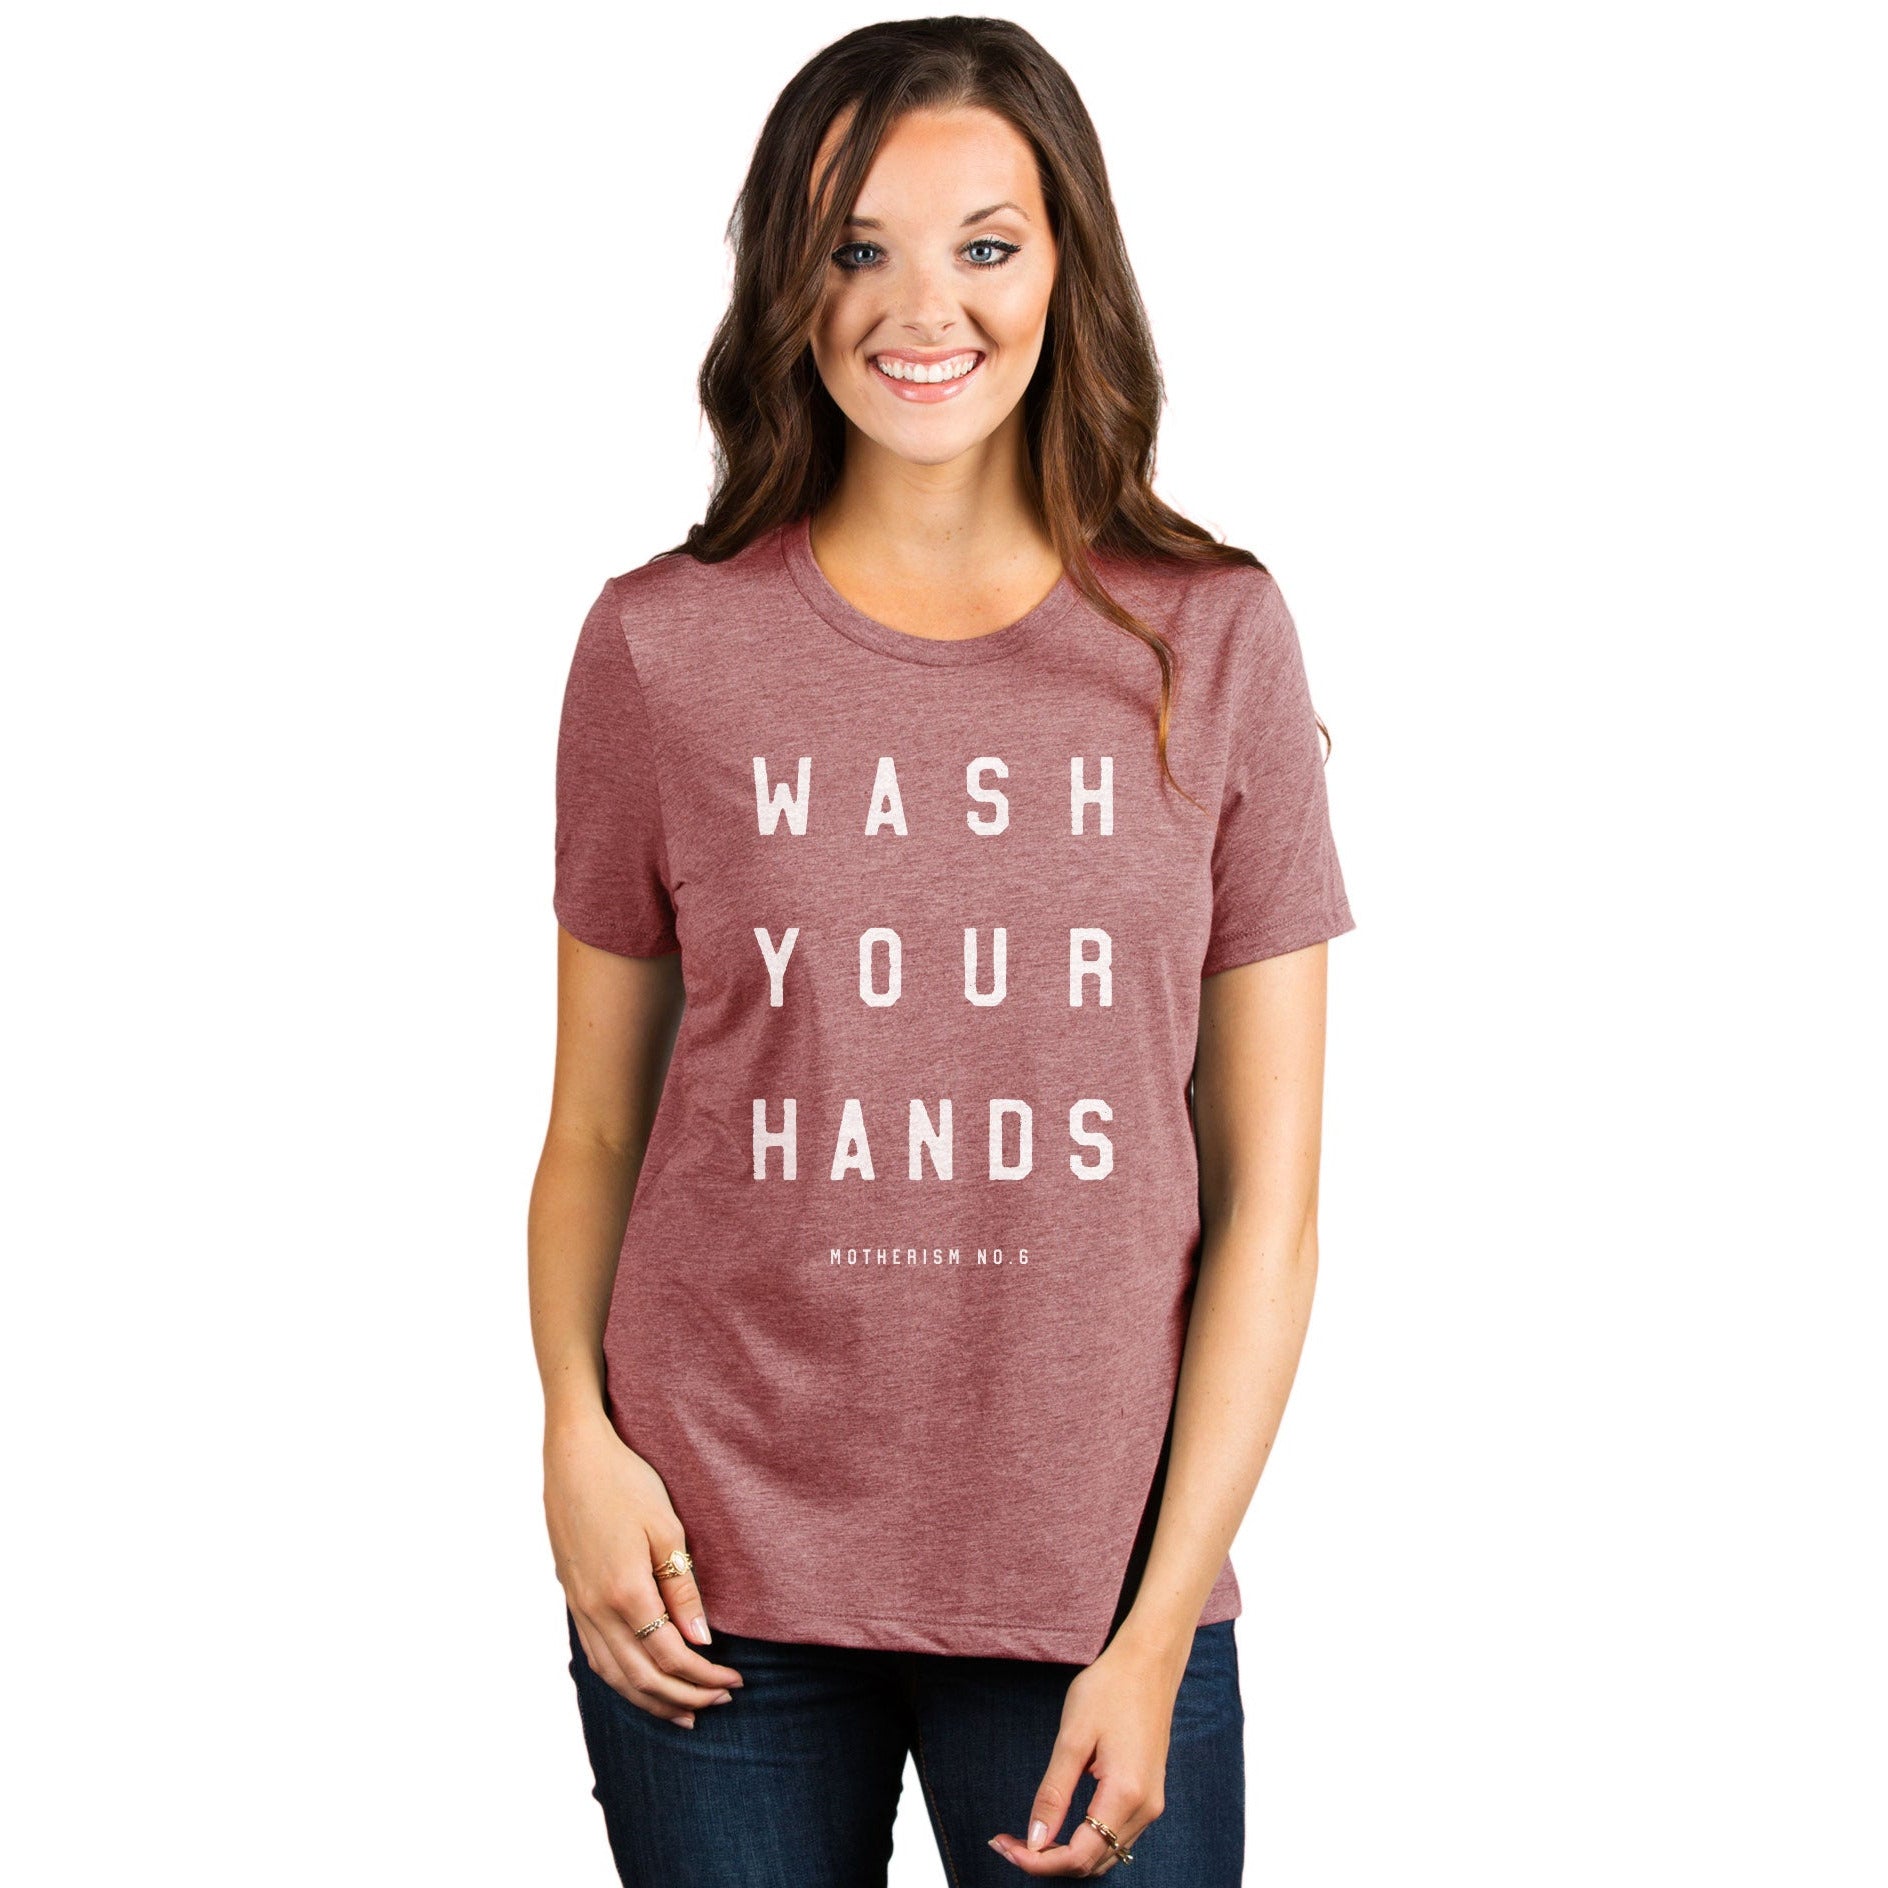 Wash Your Hands Motherism - Stories You Can Wear